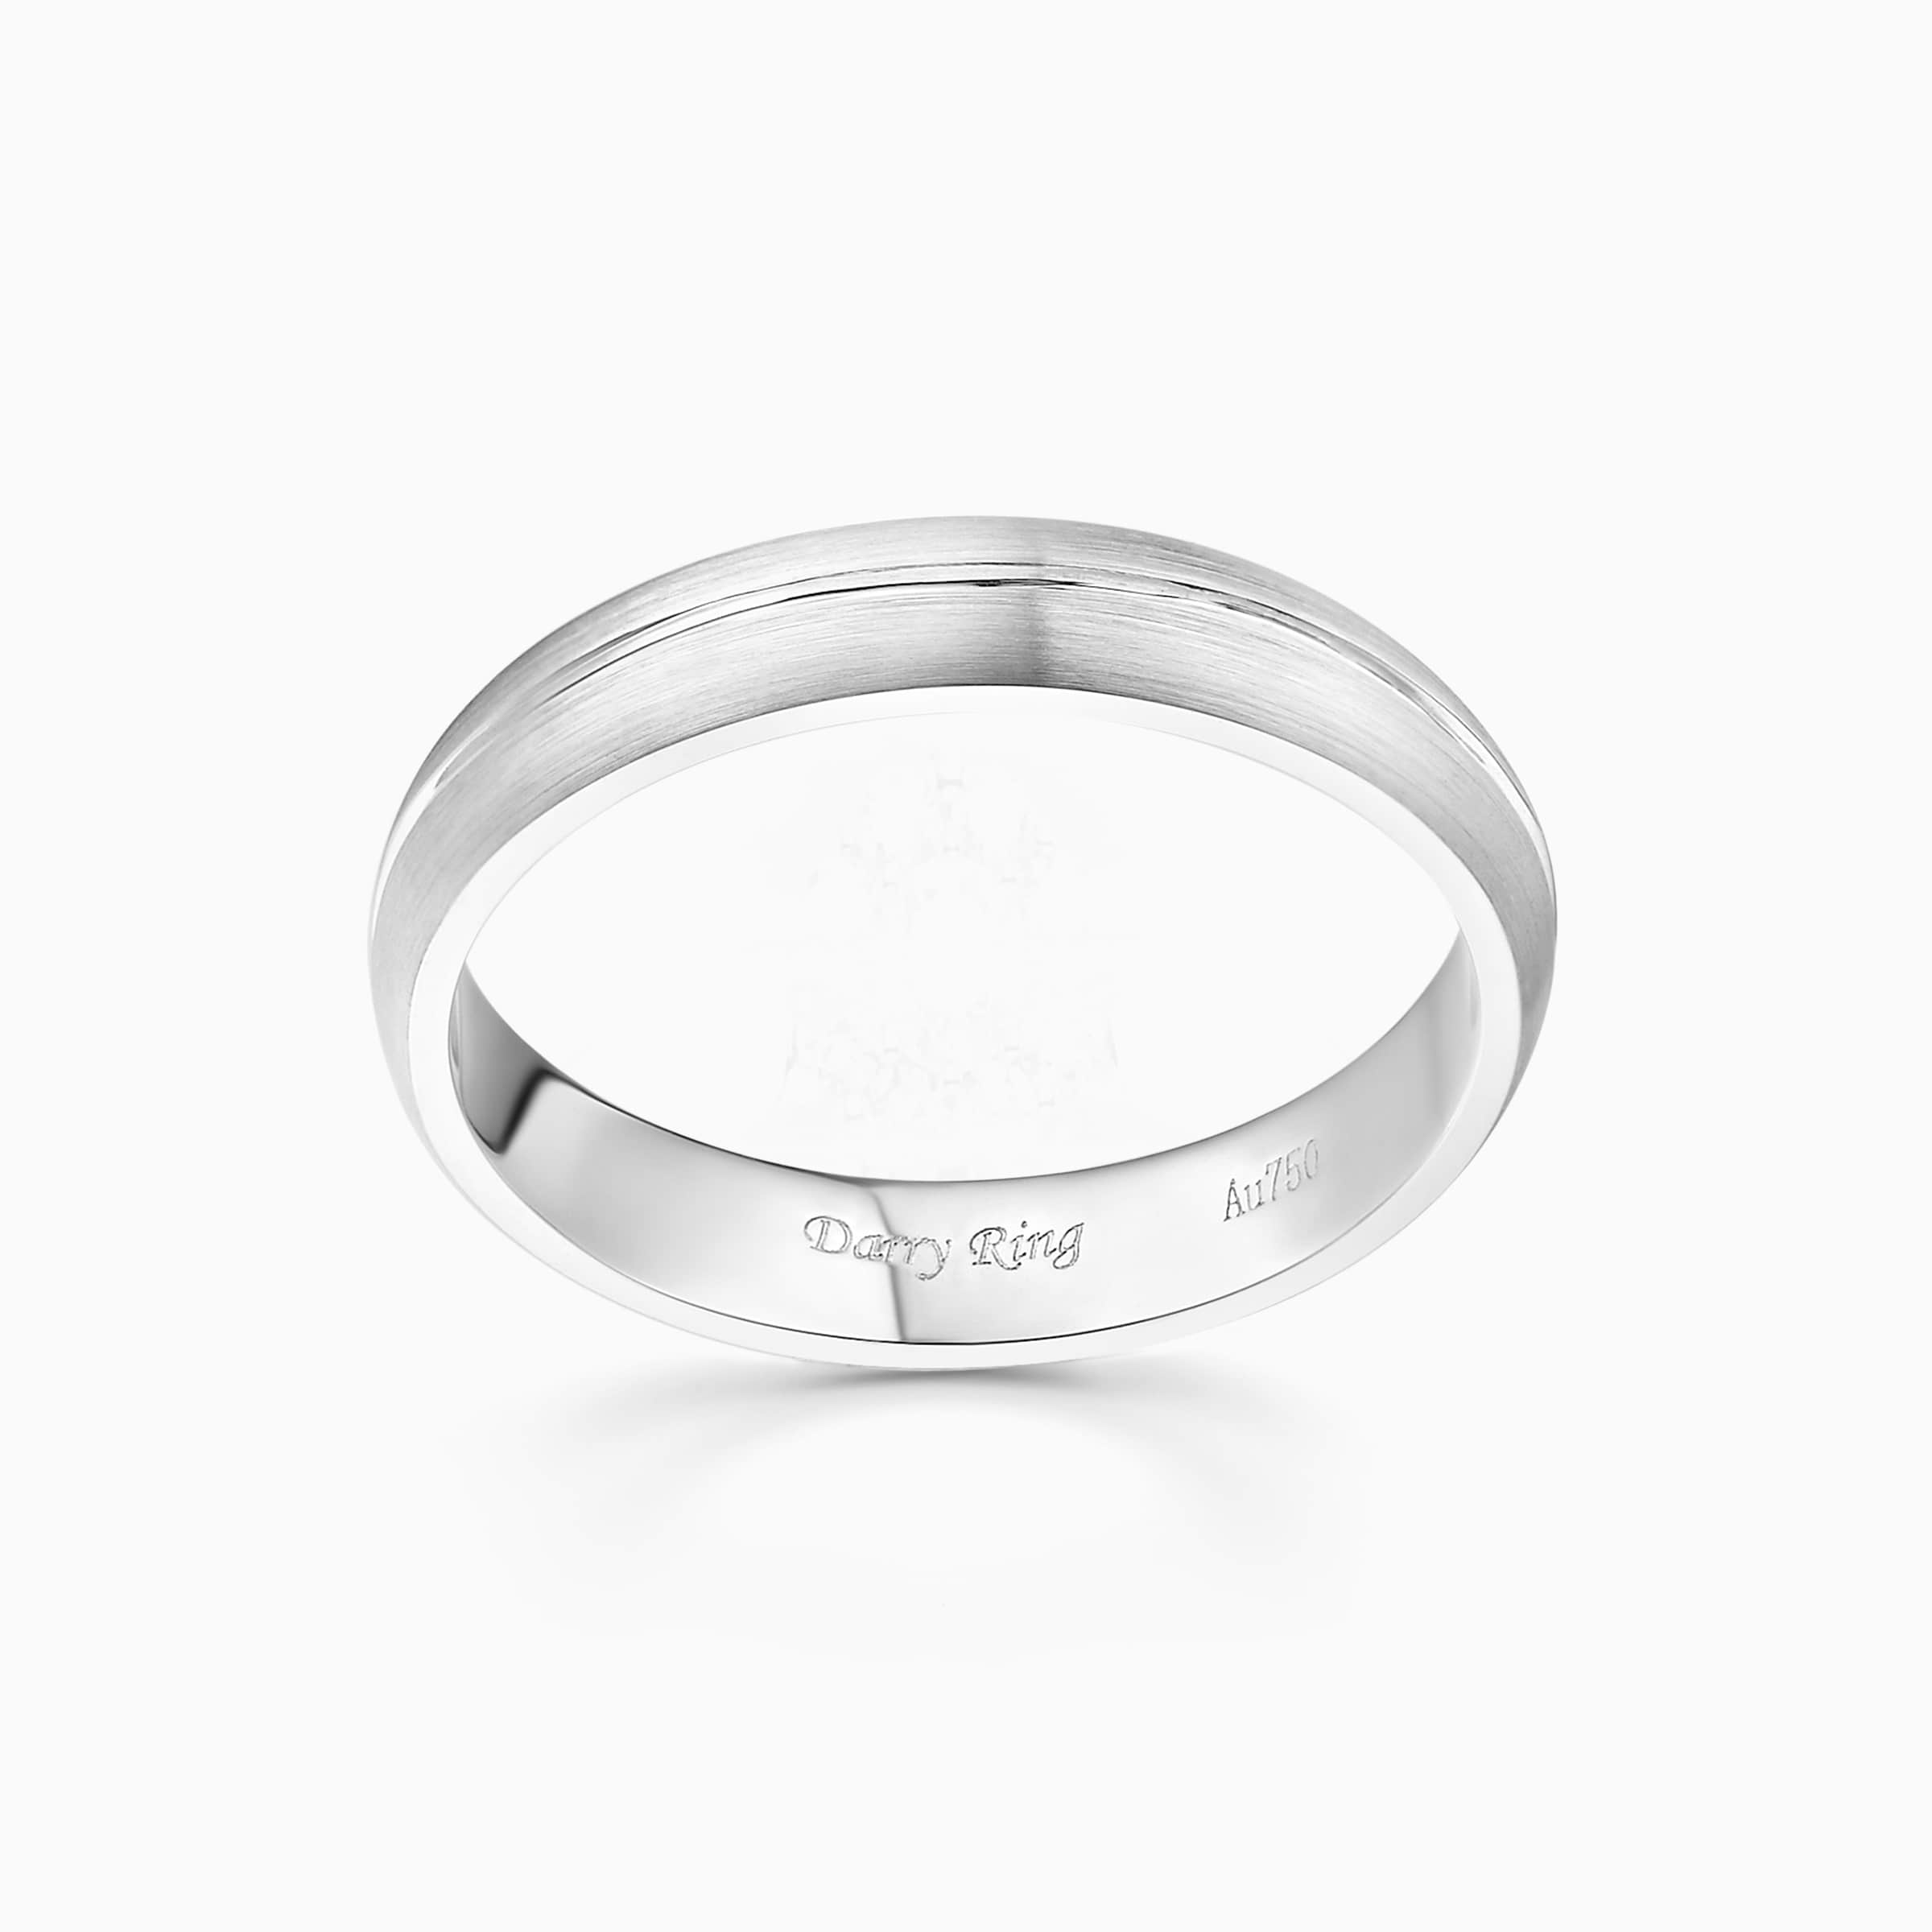 Darry Ring male wedding band in platinum